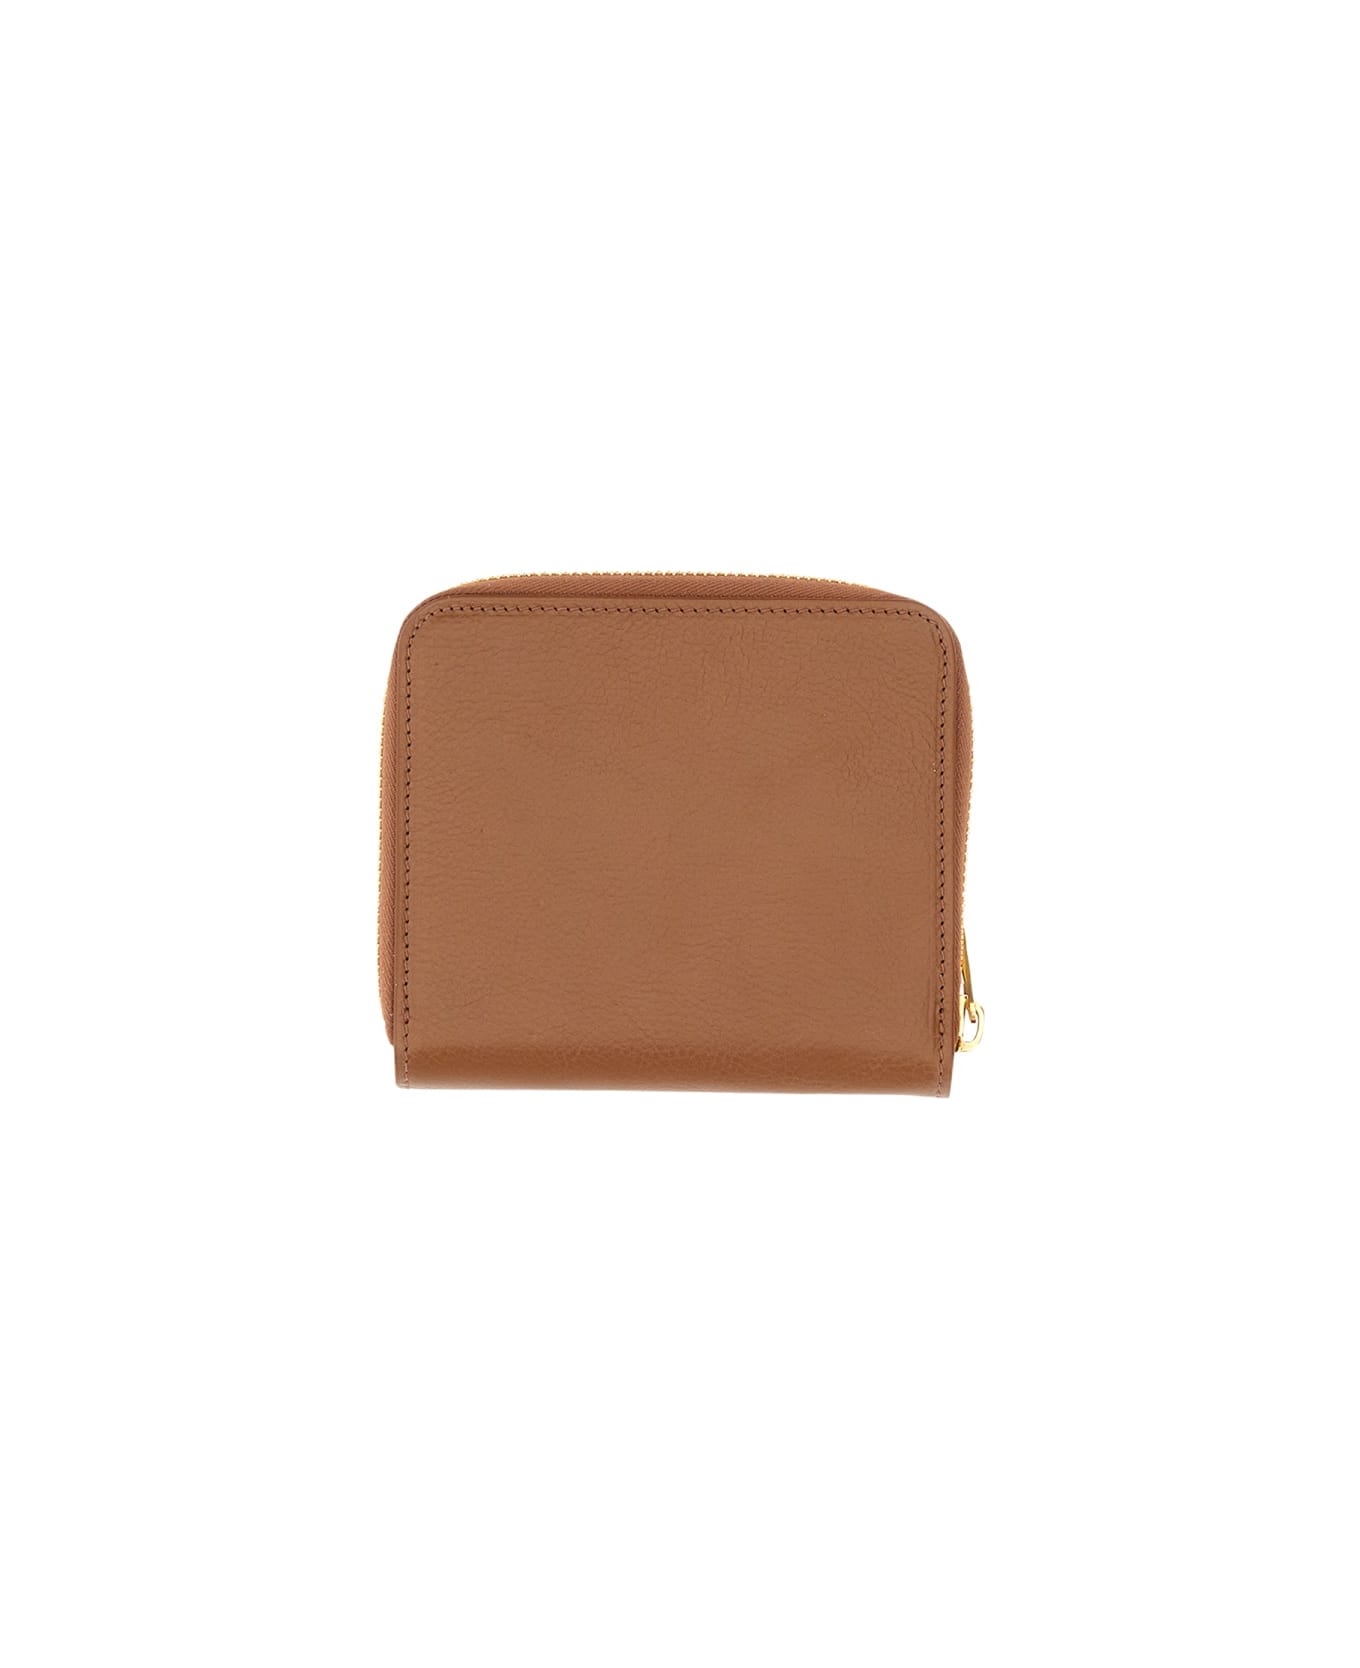 Il Bisonte Leather Wallet - BROWN